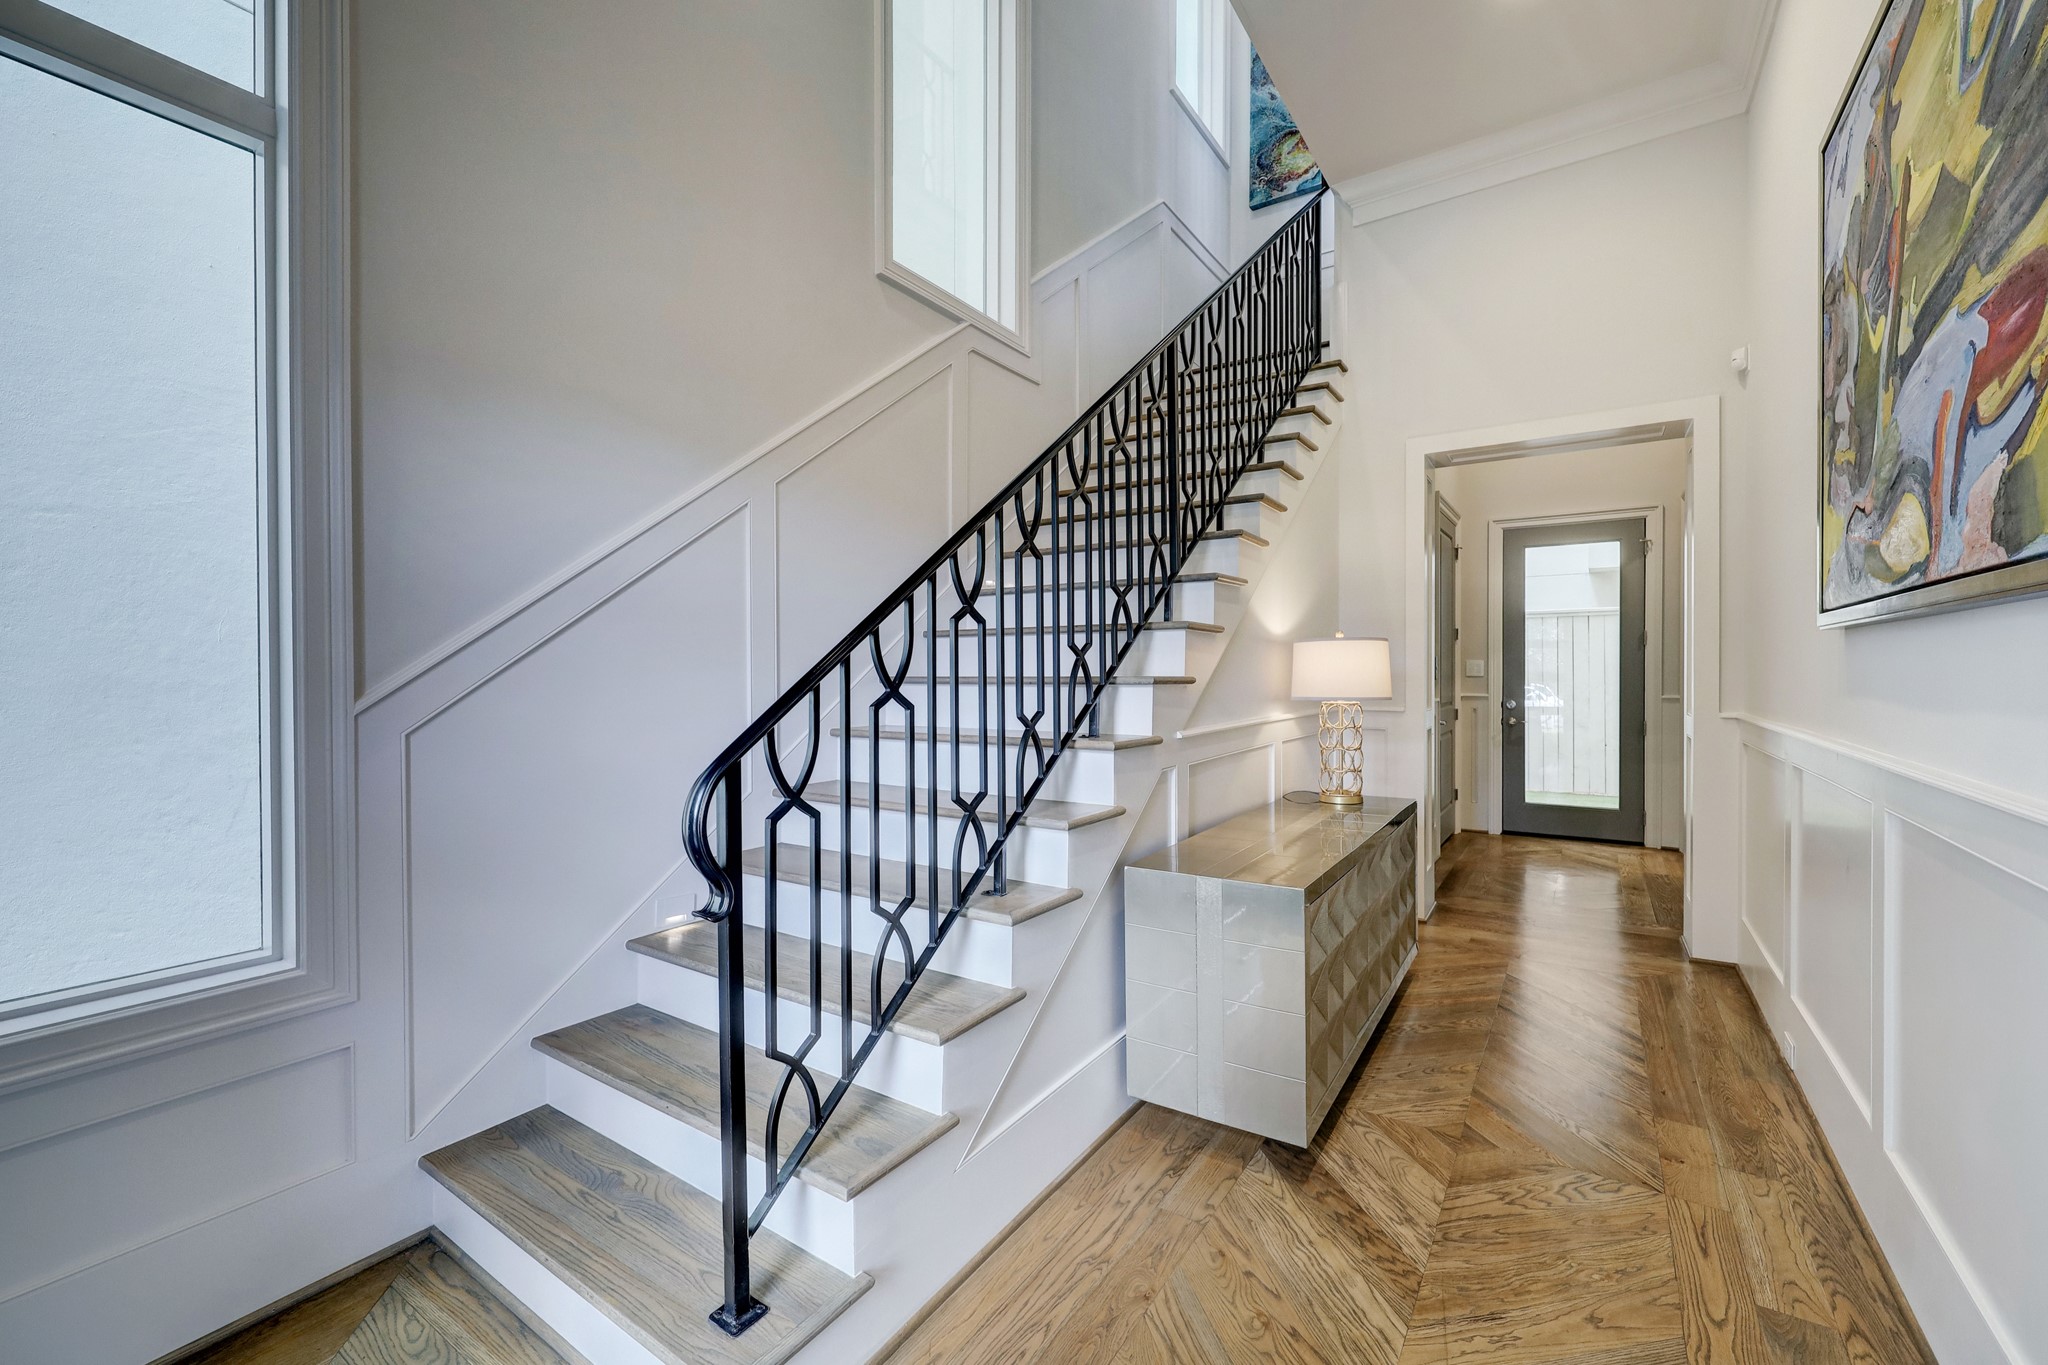 The inviting foyer features beautiful light wood flooring, wainscoted walls, access to the backyard, downstairs secondary bedroom, and stairs to the second level.